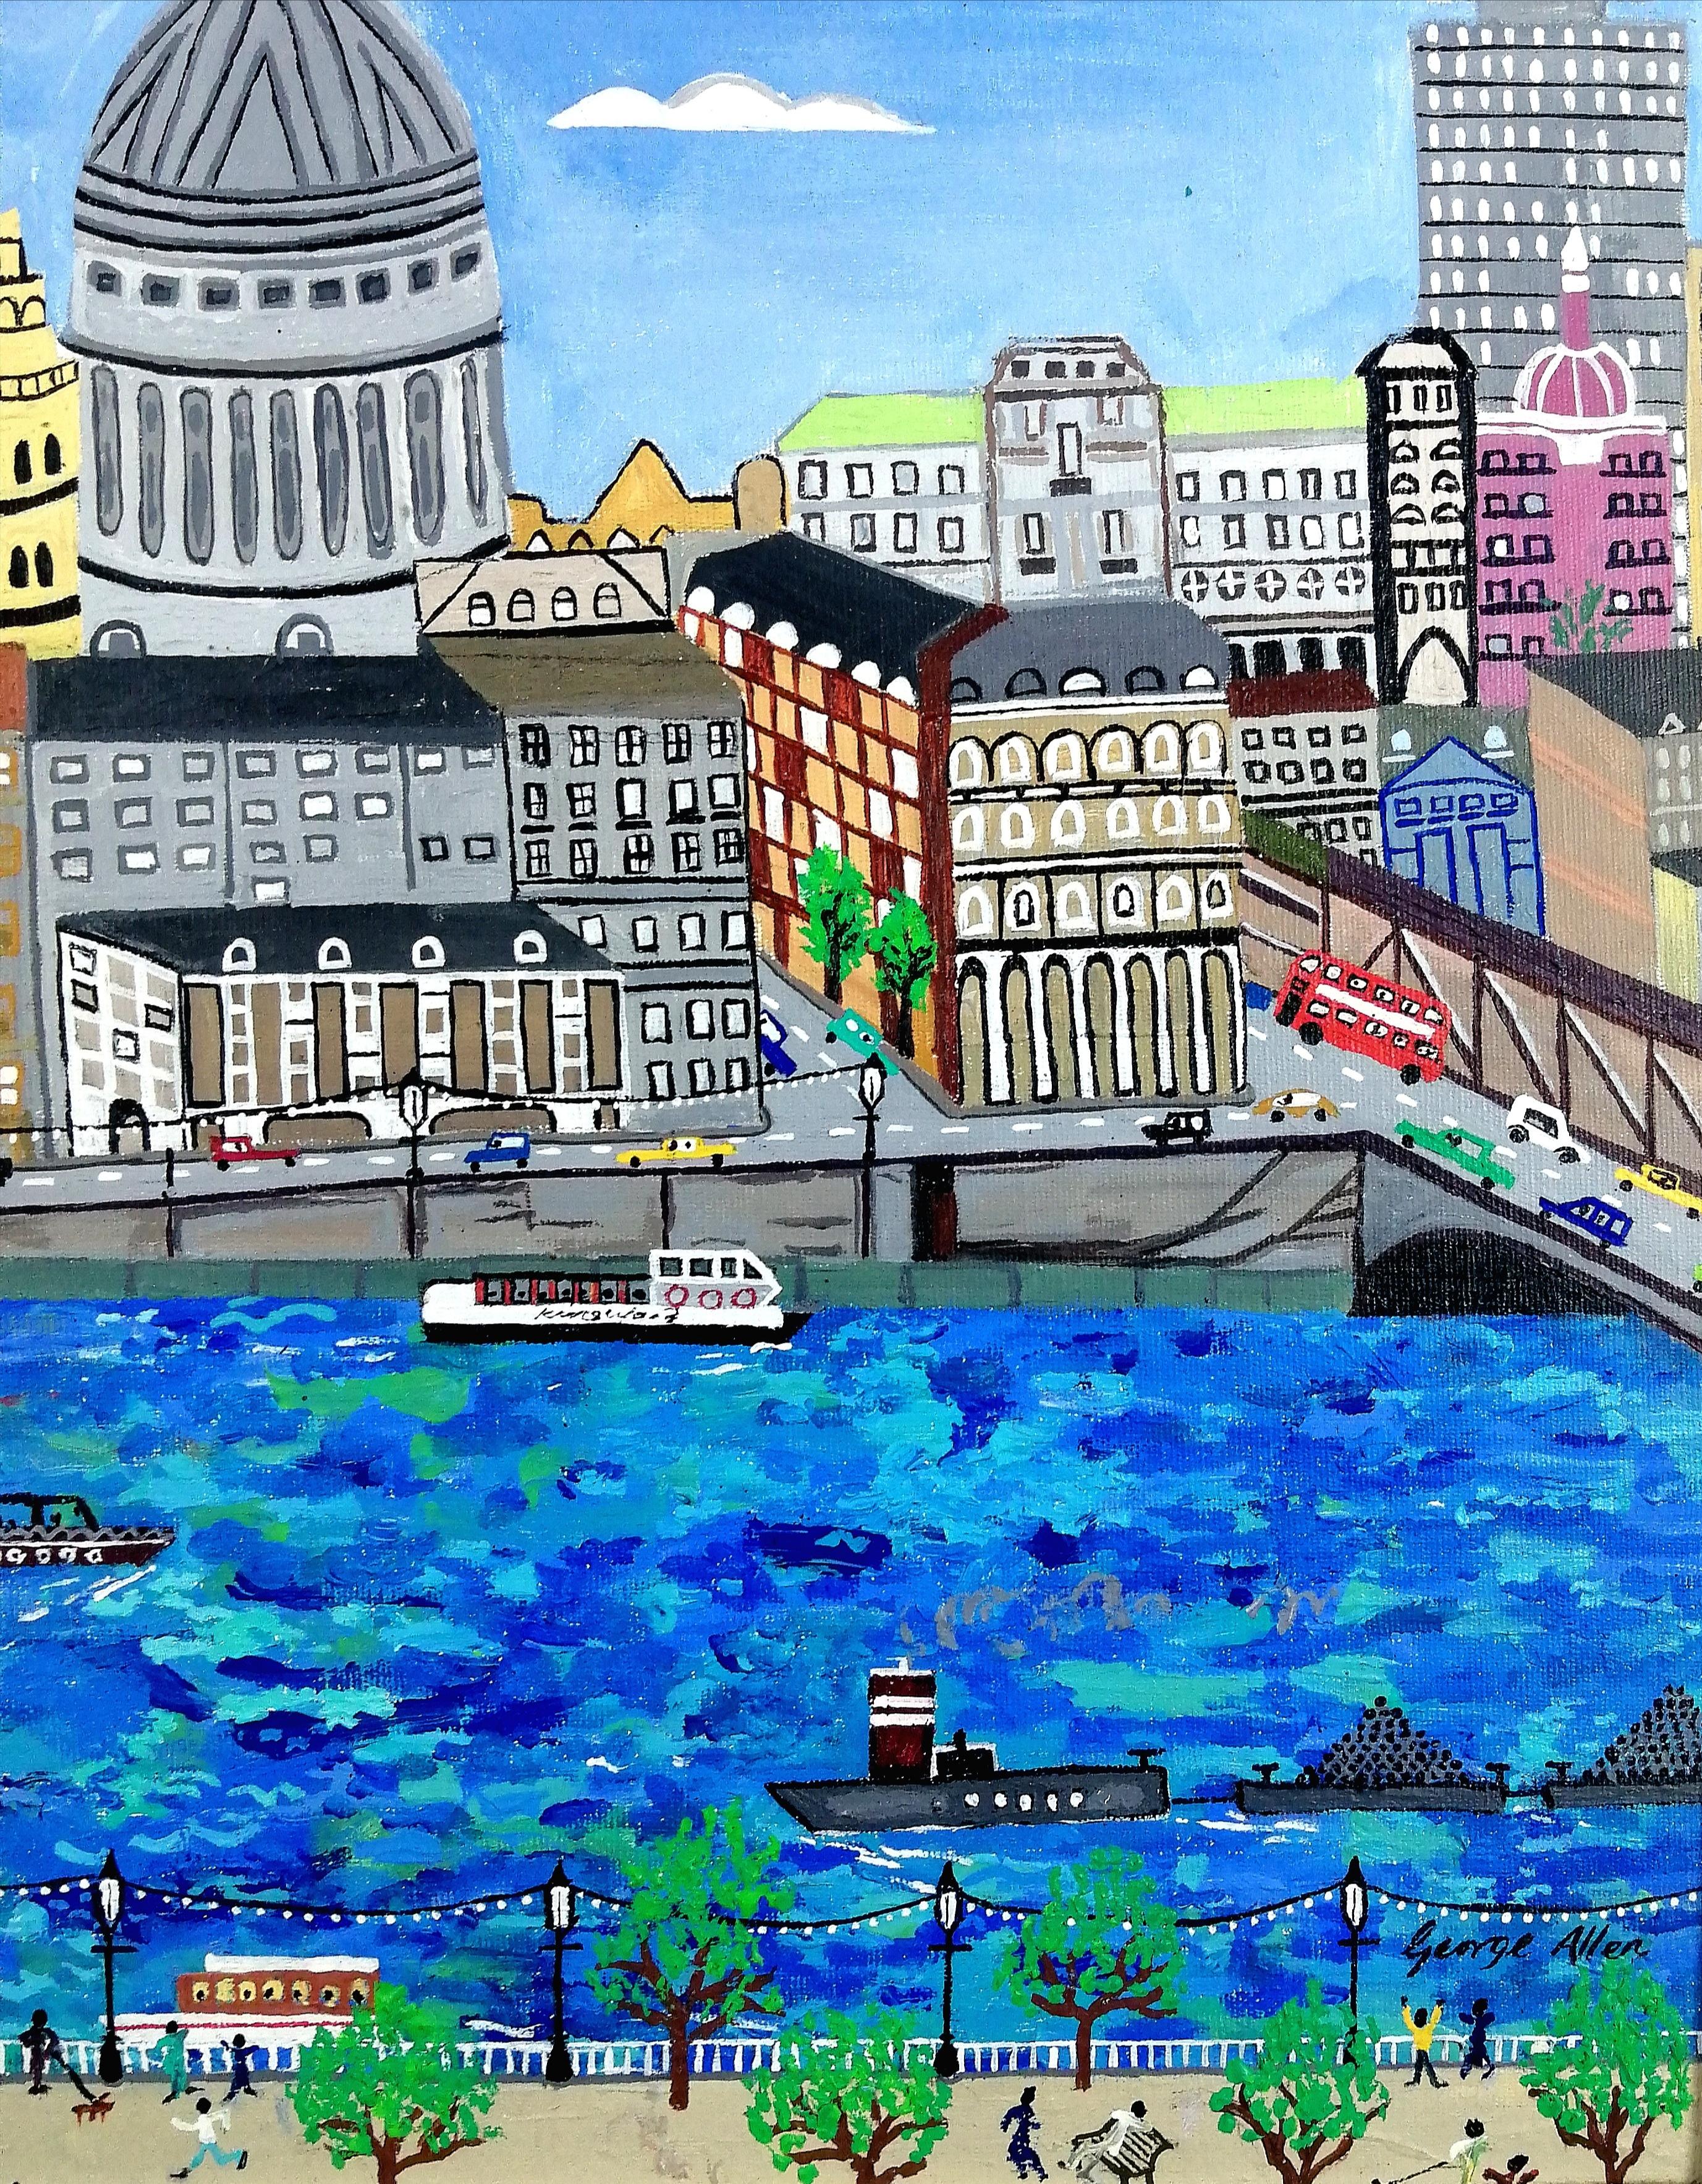 A beautiful large acrylic on canvas board depicting a view of London from the River Thames by George Allen. Signed lower right and presented in it's original painted frame. Royal Academy Summer Exhibition 1994 label on the reverse.

Artist: George